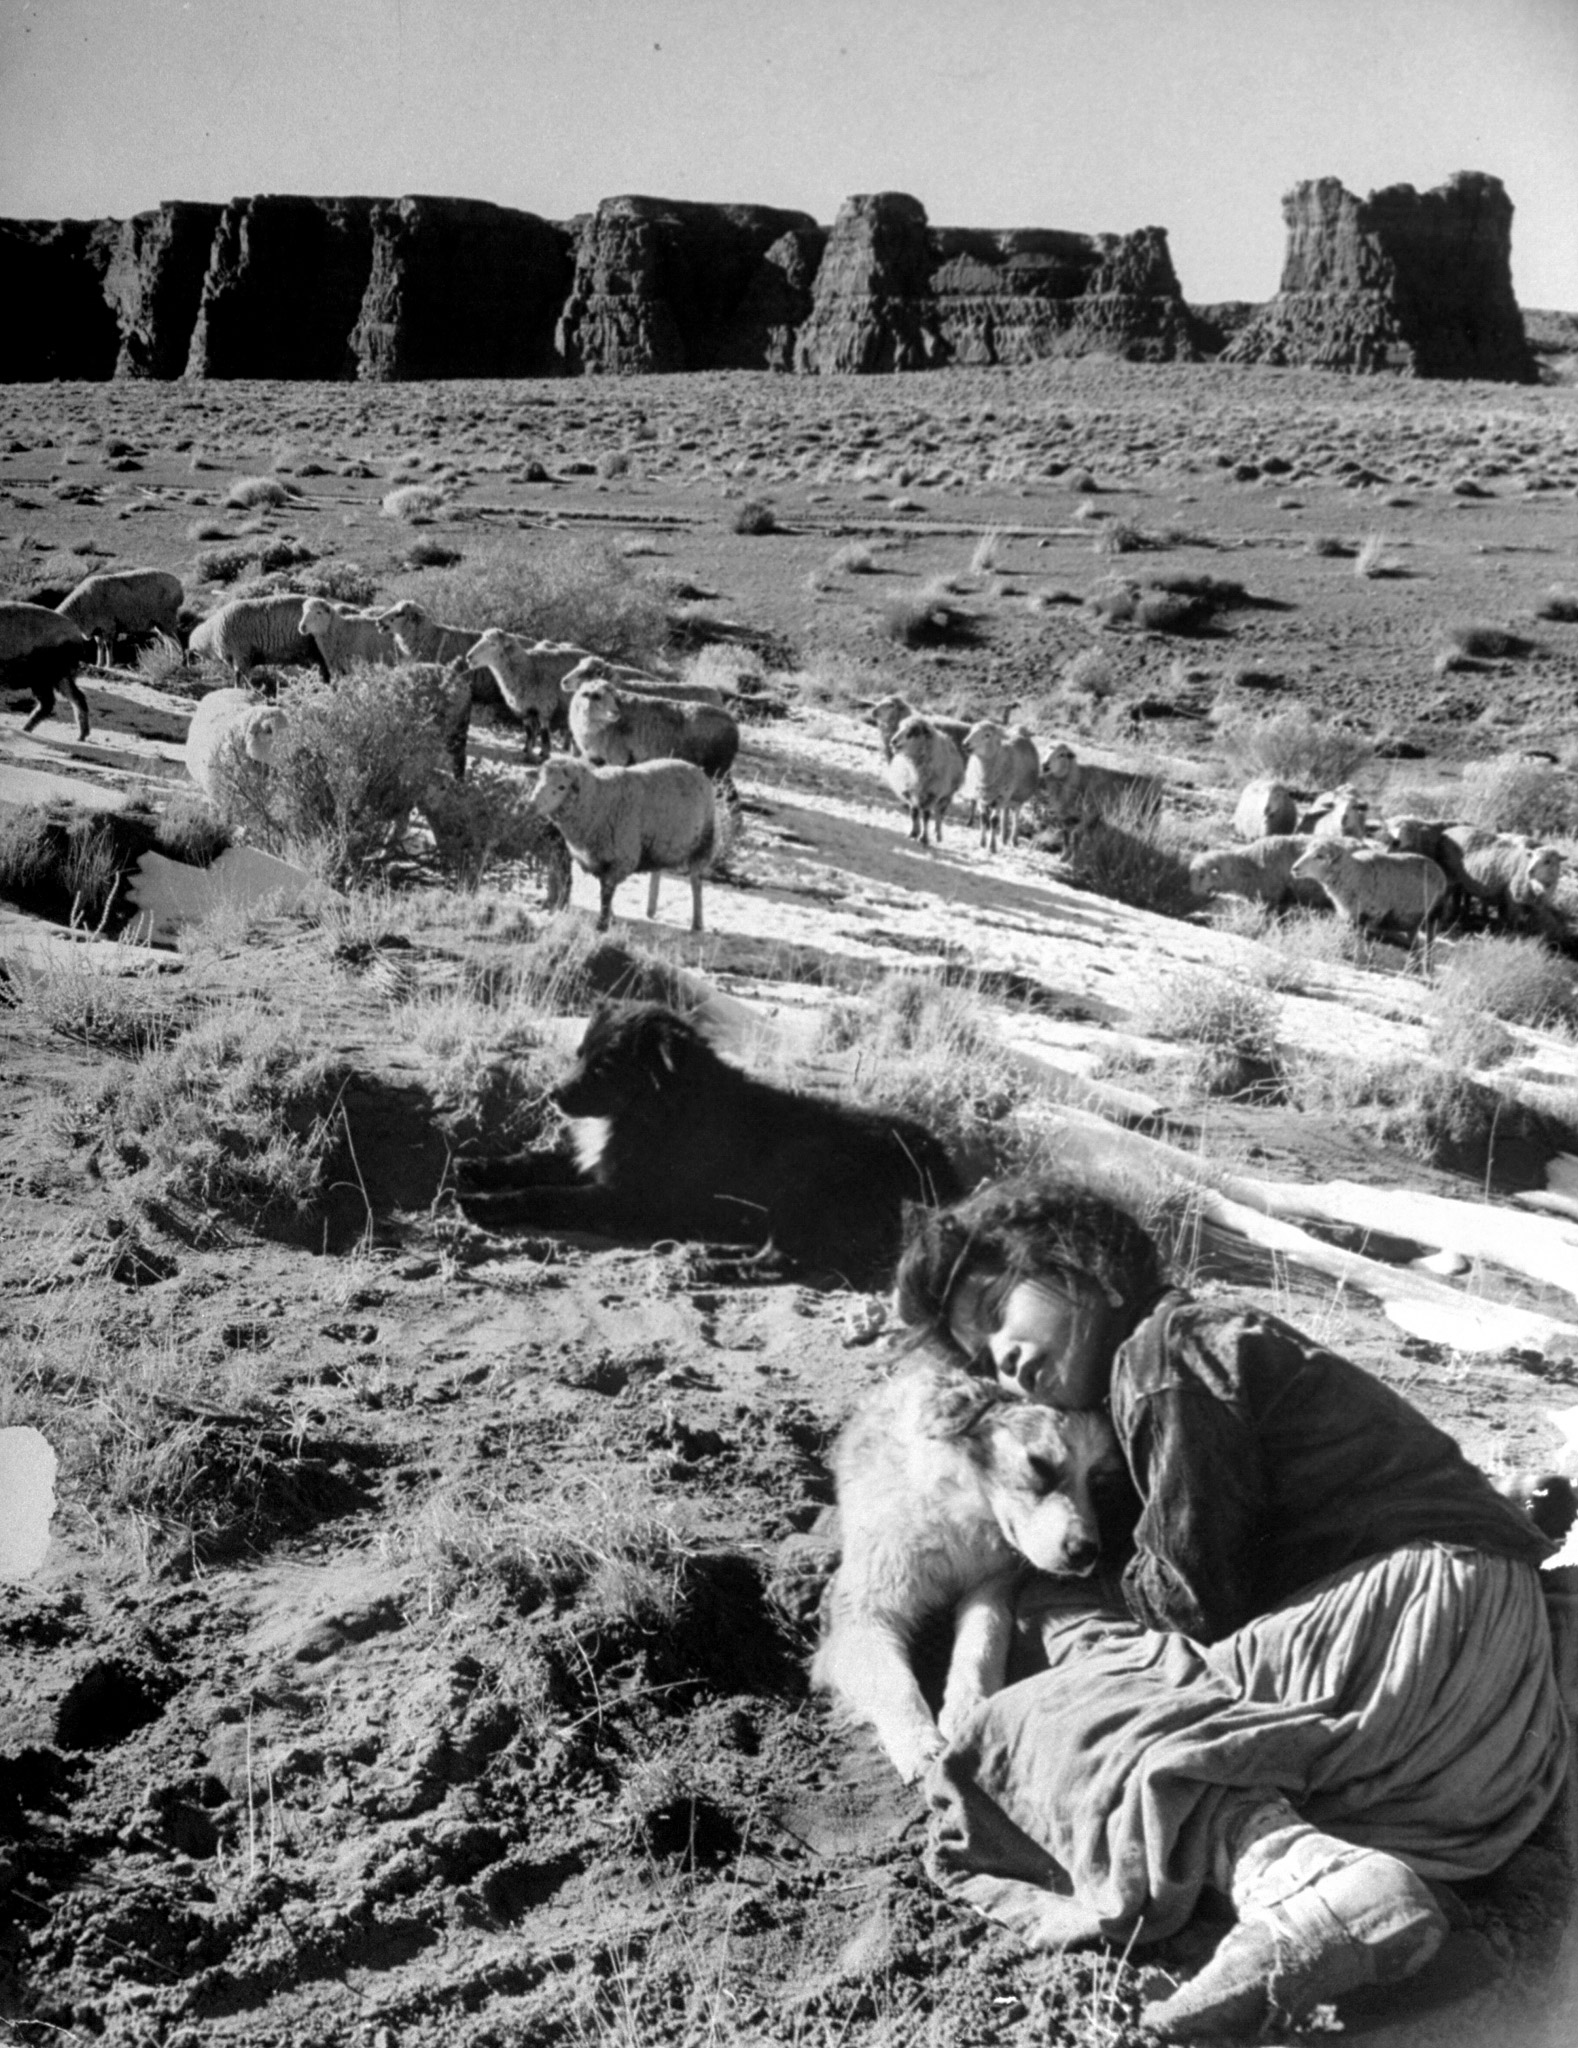 A Navajo girl hugging her dog while she watches the sheep on the high plateau.